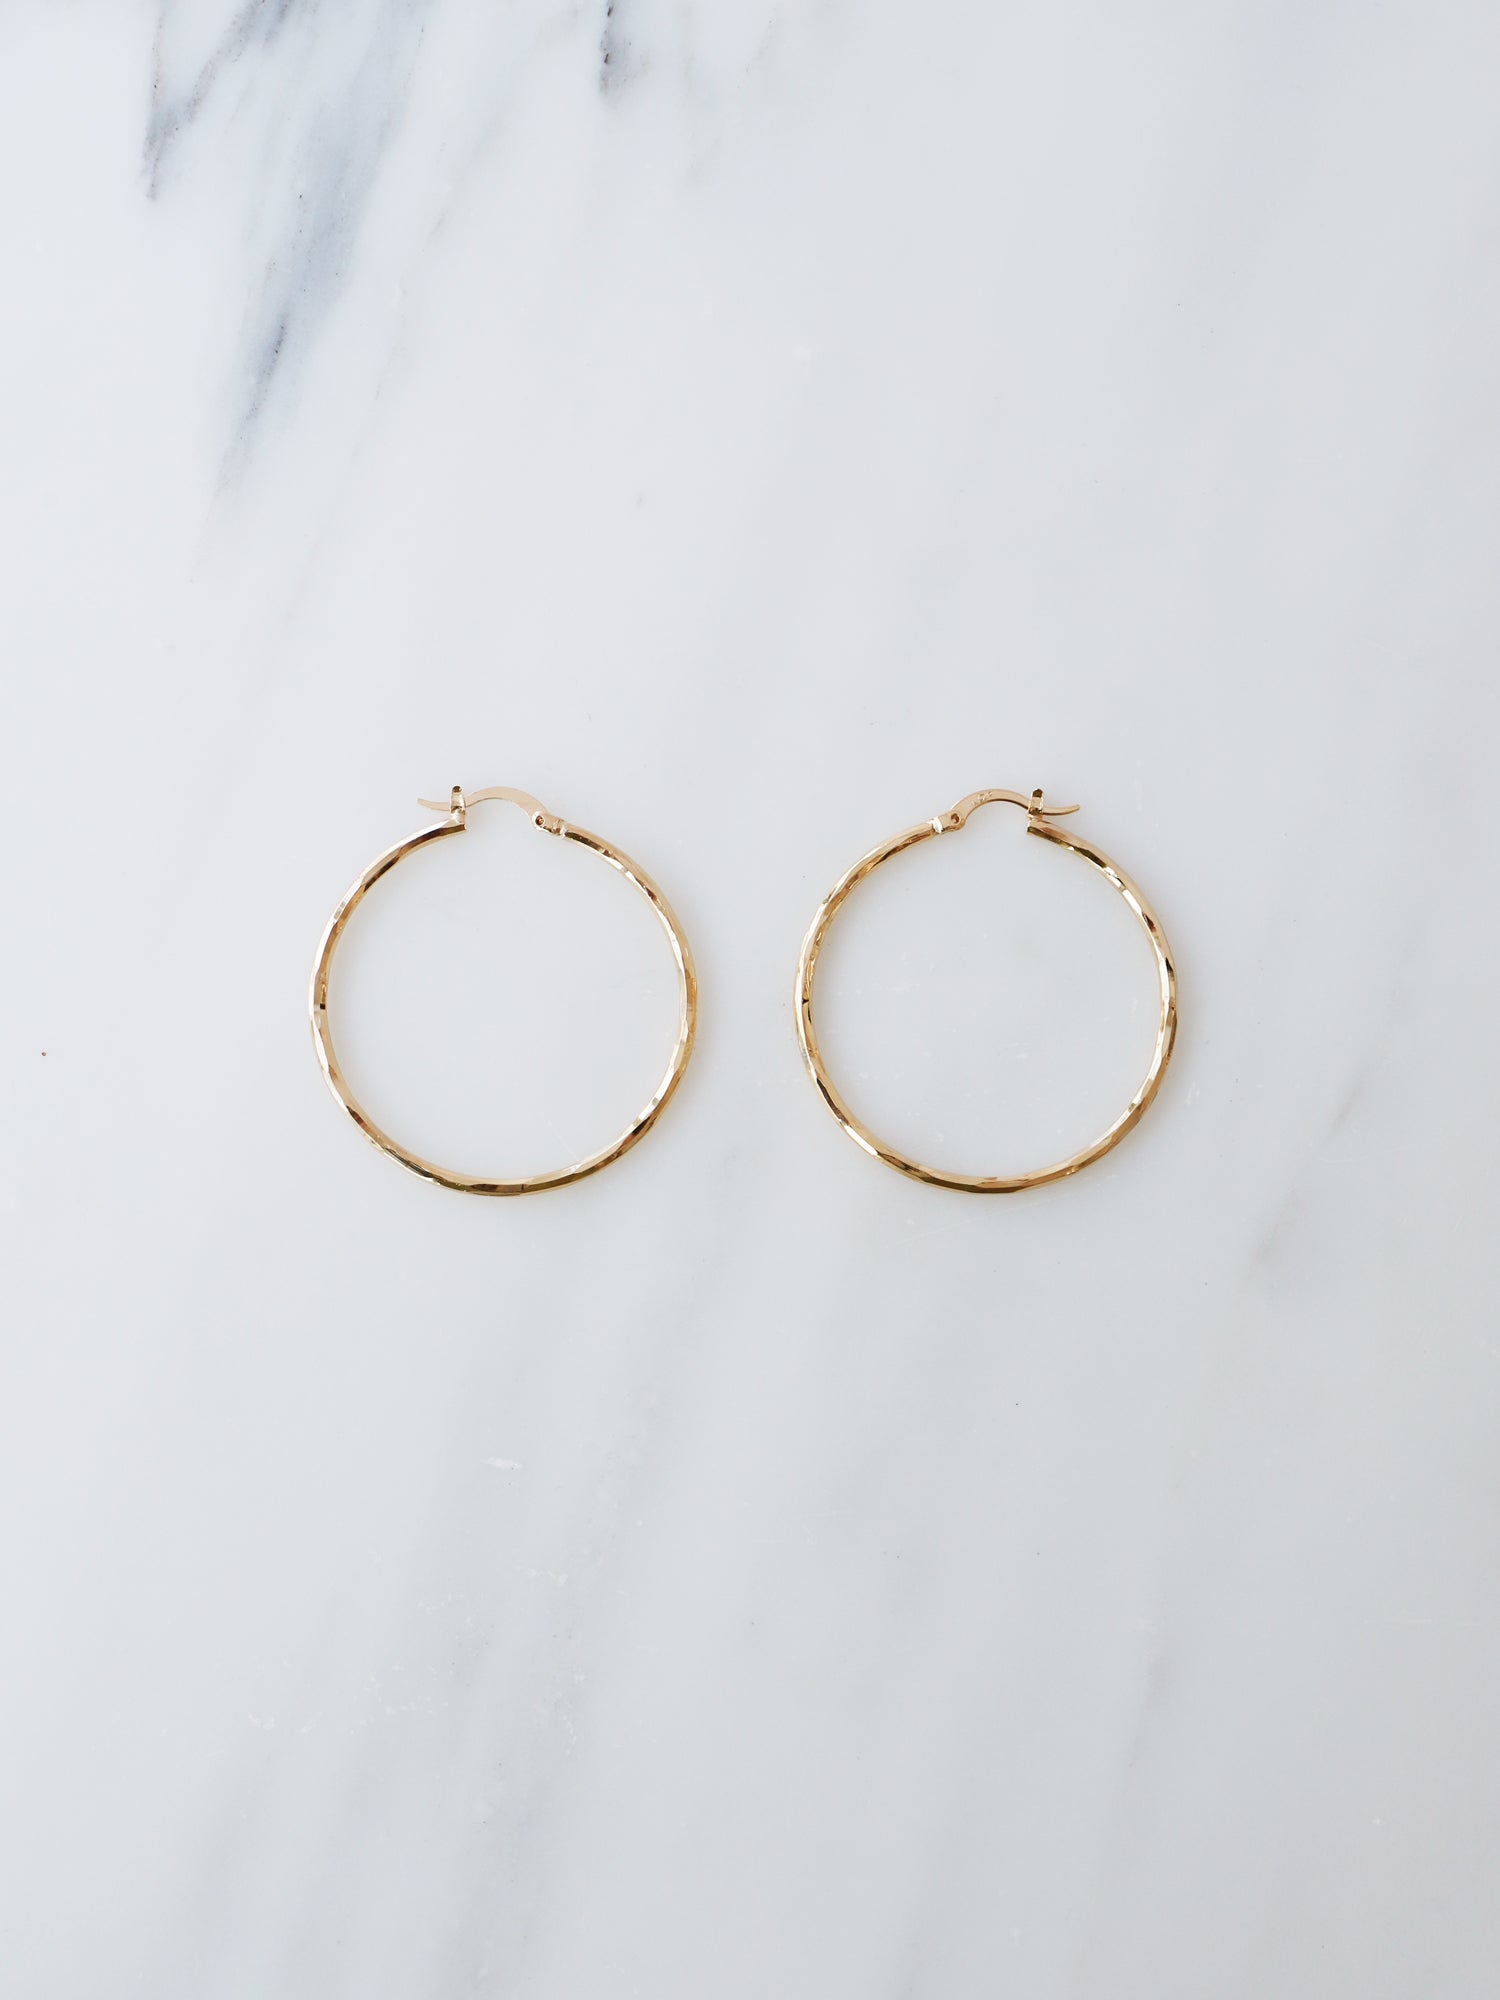 40mm hoops are made from solid brass with a very high quality 3-micron 24k gold-plating. Handmade in France, available from Wolf & Moon. 